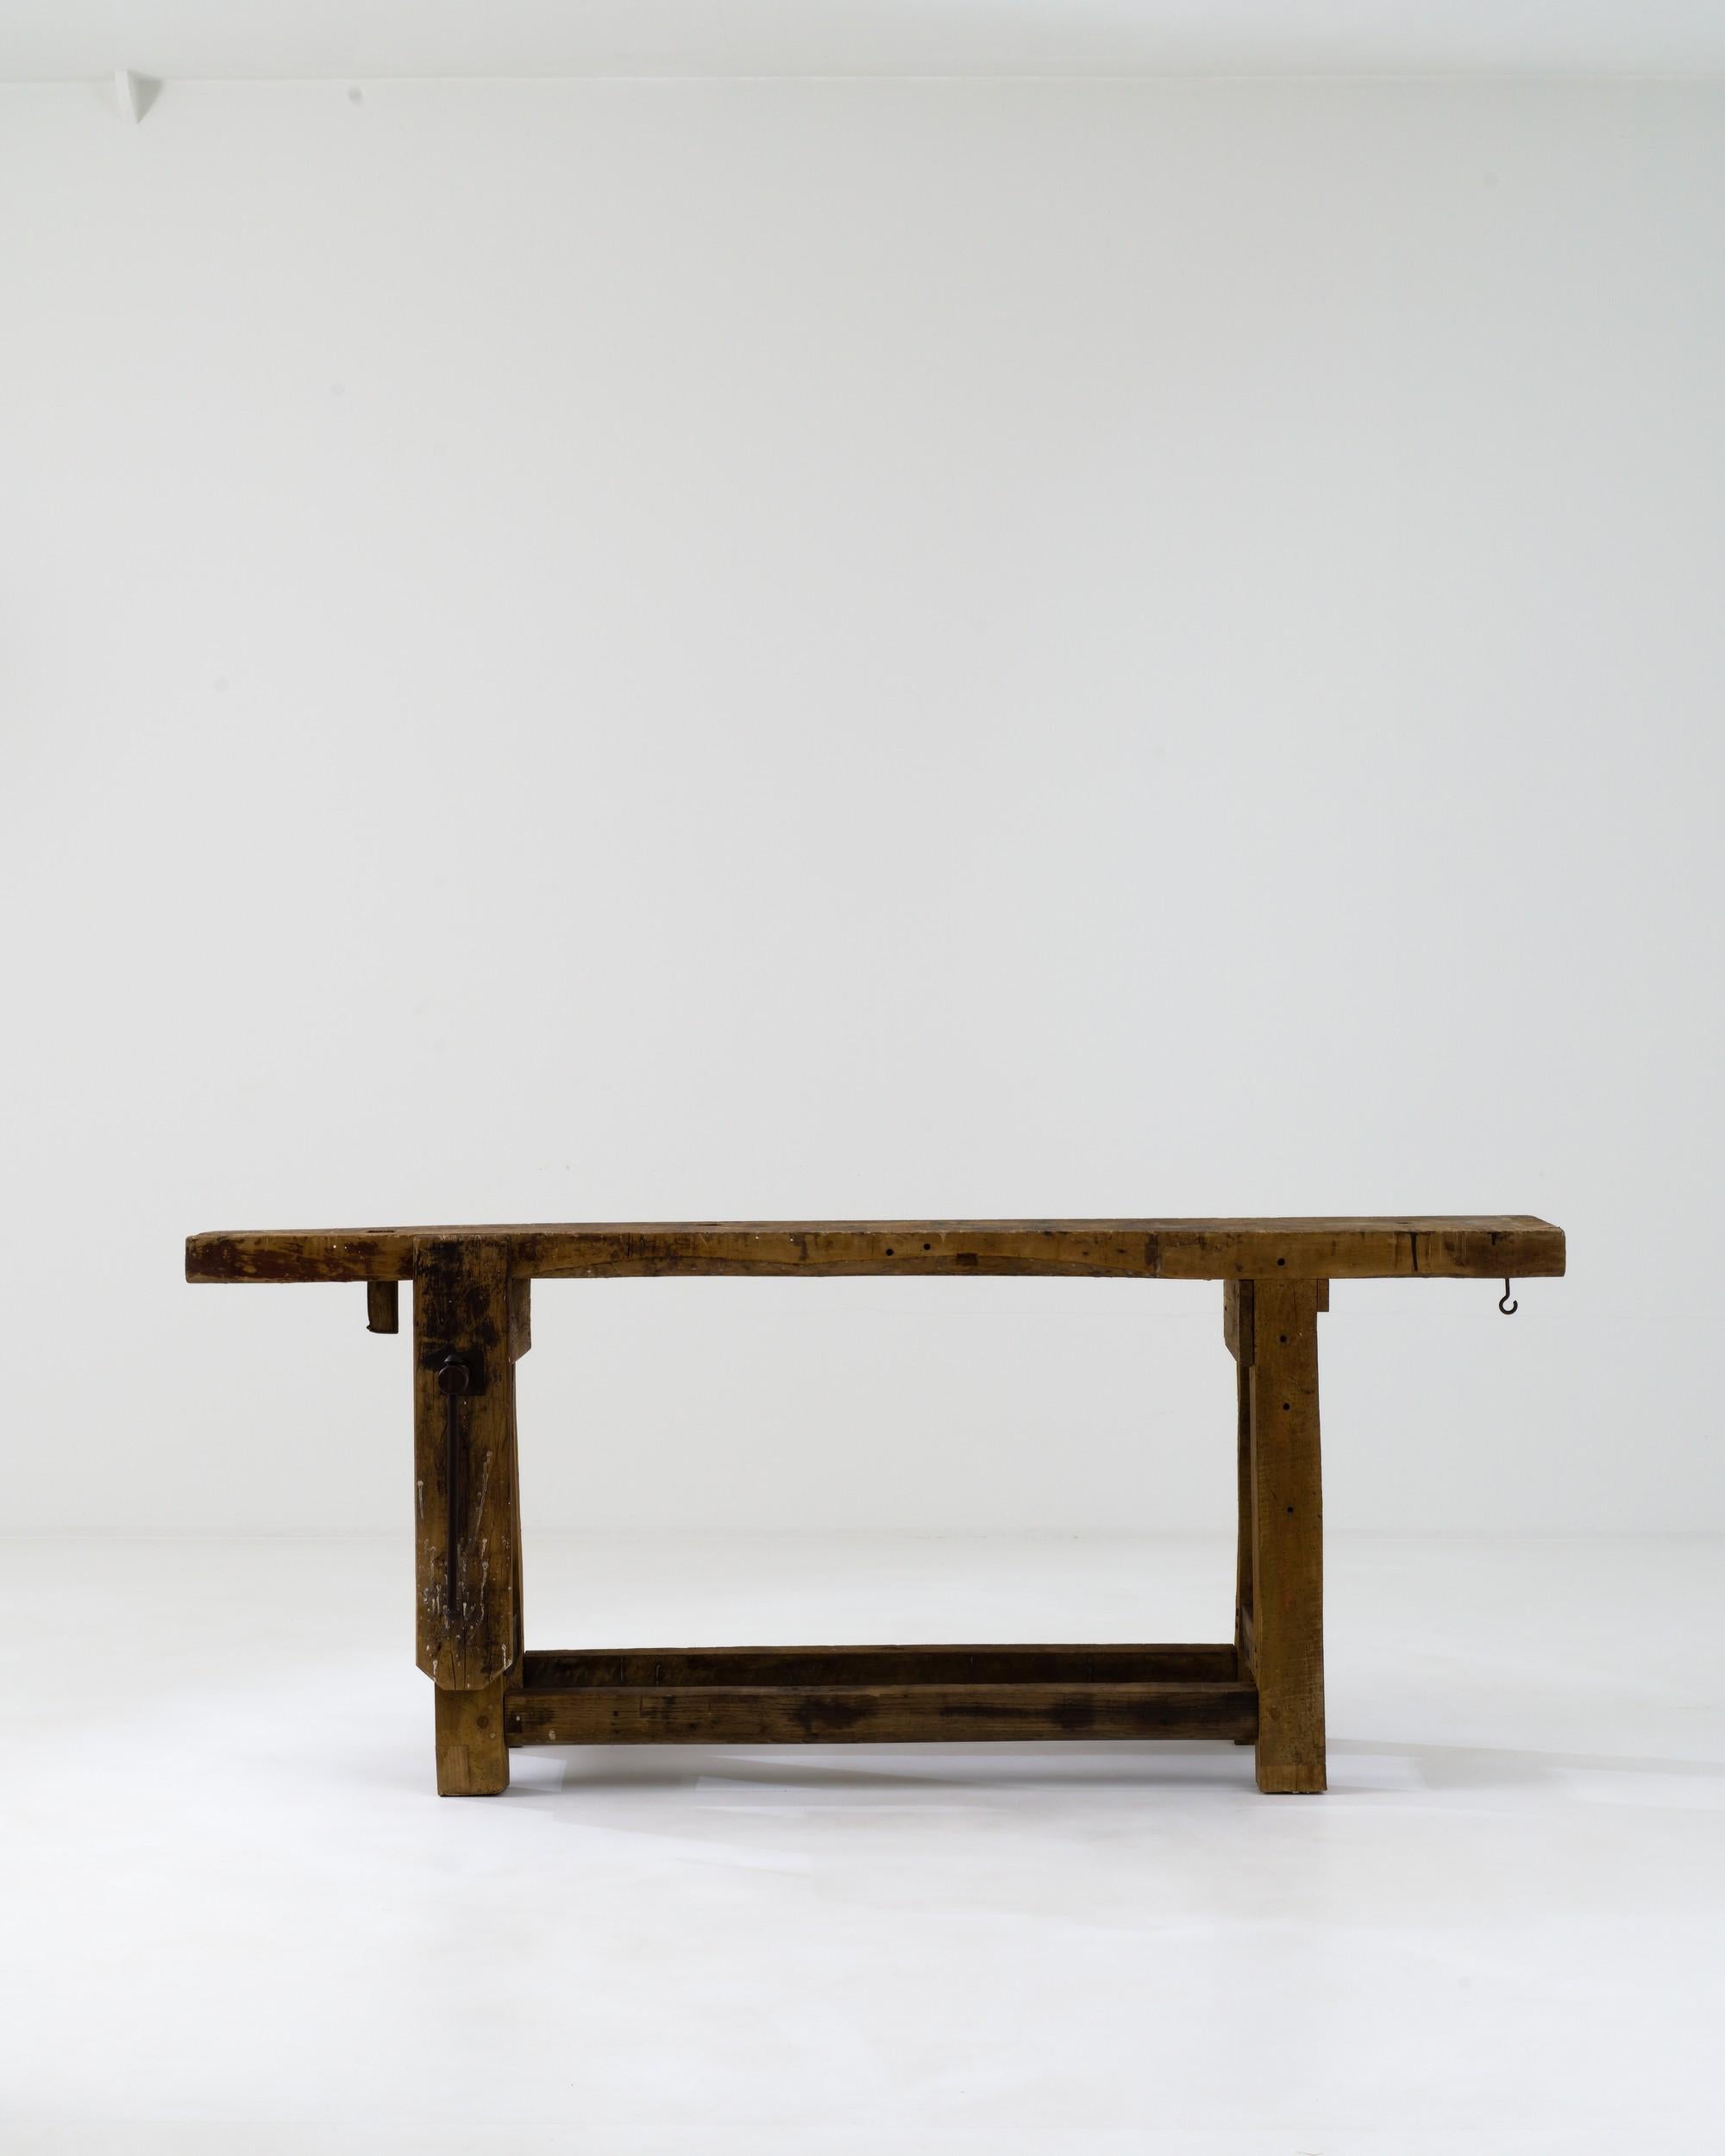 Bearing the marks of numerous artisanal projects, this authentic worktable was crafted in France during the 20th century. Its rectangular top rests on sturdy A-shaped legs, offering a spacious and robust workspace. Several metal details, such as a